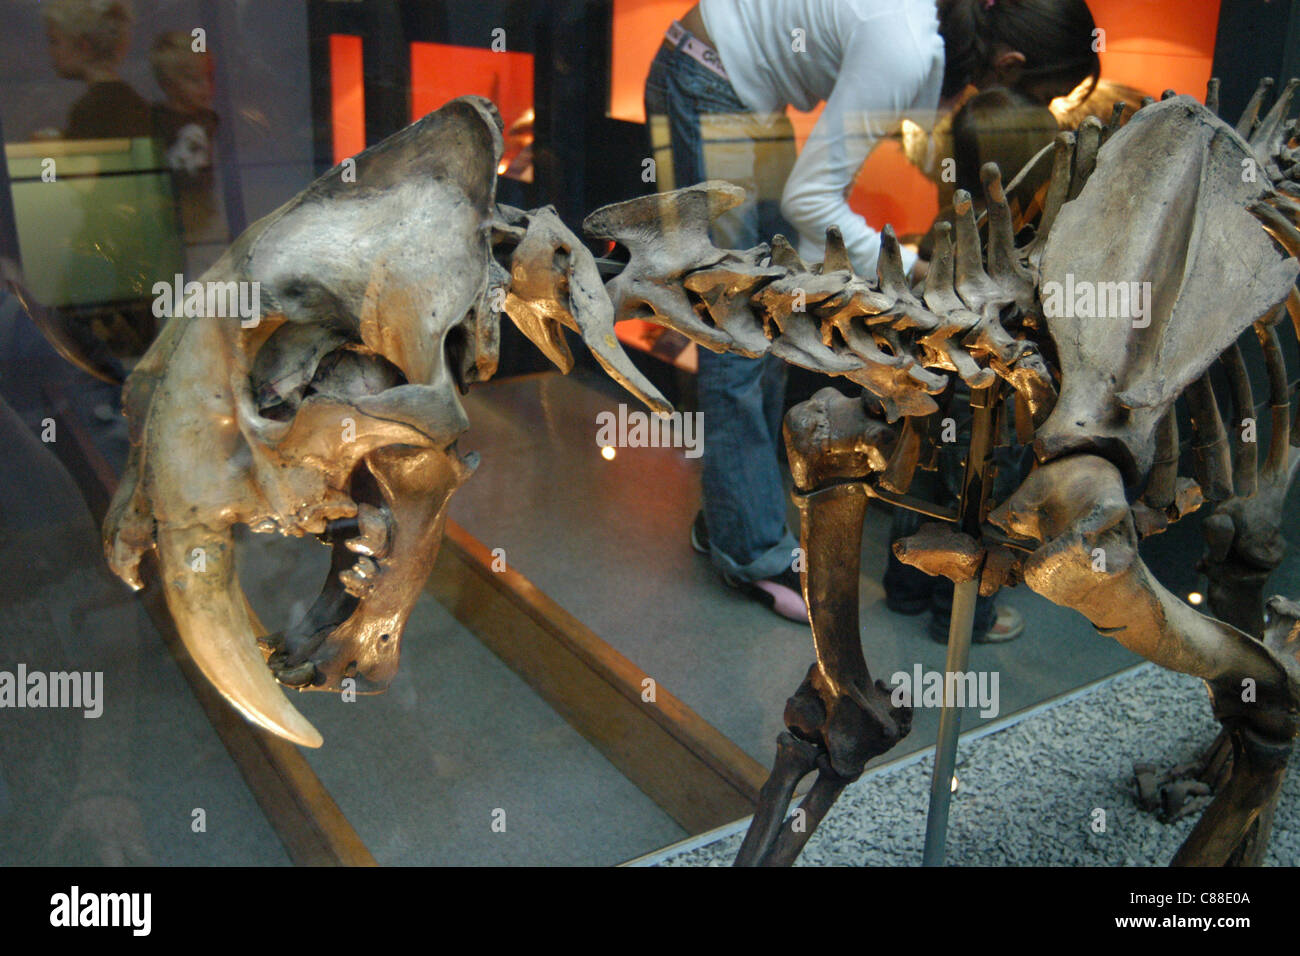 Skeleton of an extinct sabre-toothed tiger (Smilodon) seen at the Natural History Museum in London, England, UK. Stock Photo